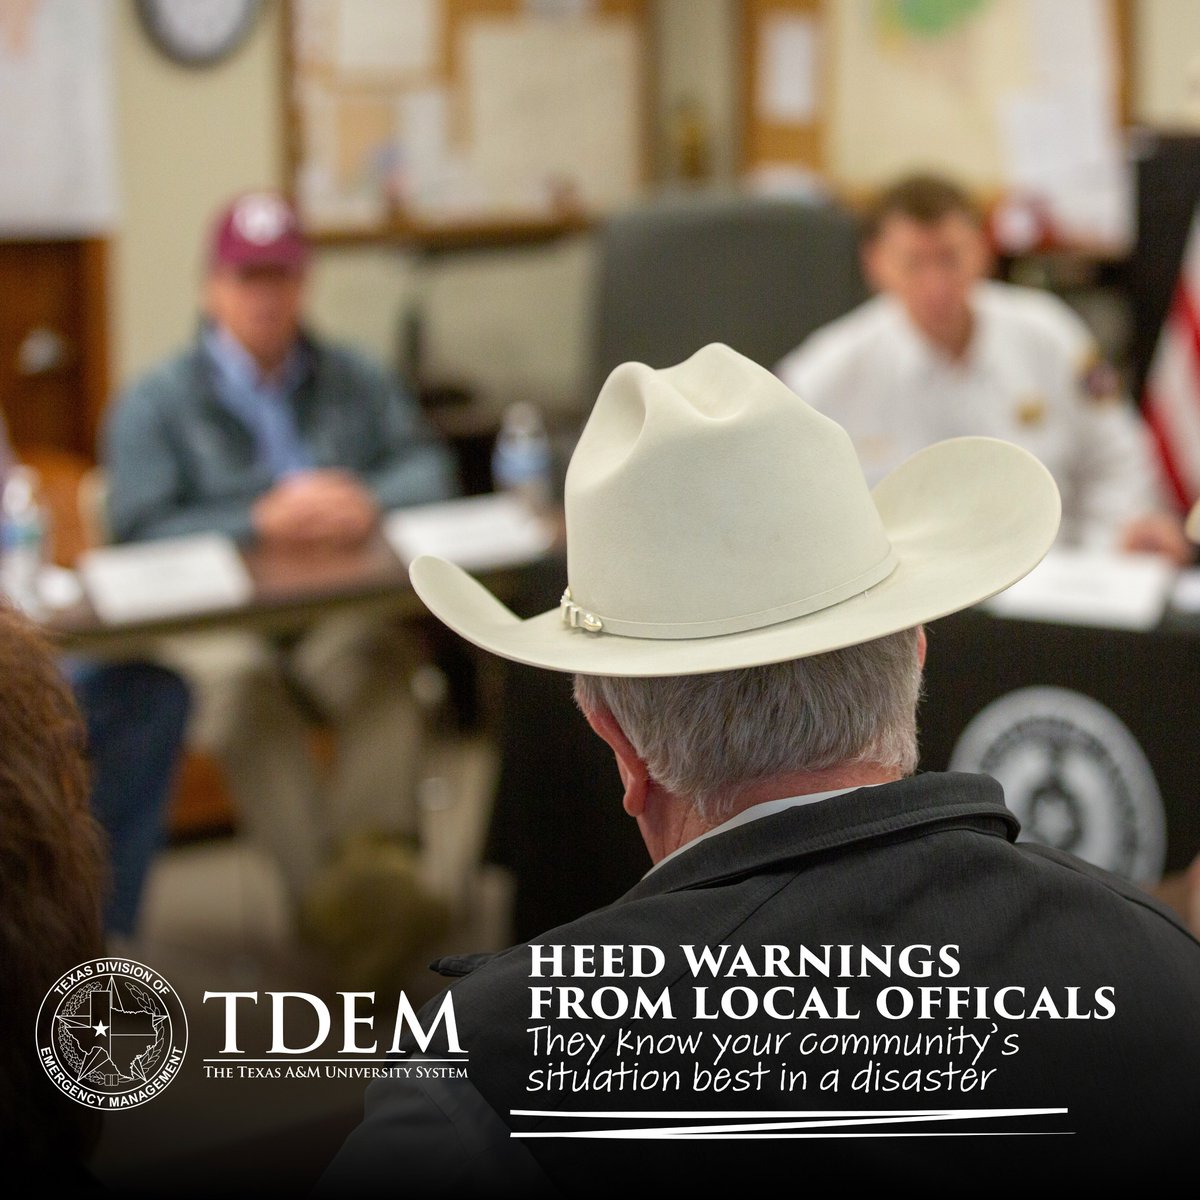 When disaster strikes— follow the guidance of local officials. They know your community situation best. ⚠️ Follow any evacuation orders 🚫 Never drive or walk through flooded areas 📻 Stay updated with local forecast information Severe Storm Resources: tdem.texas.gov/disasters/spri…